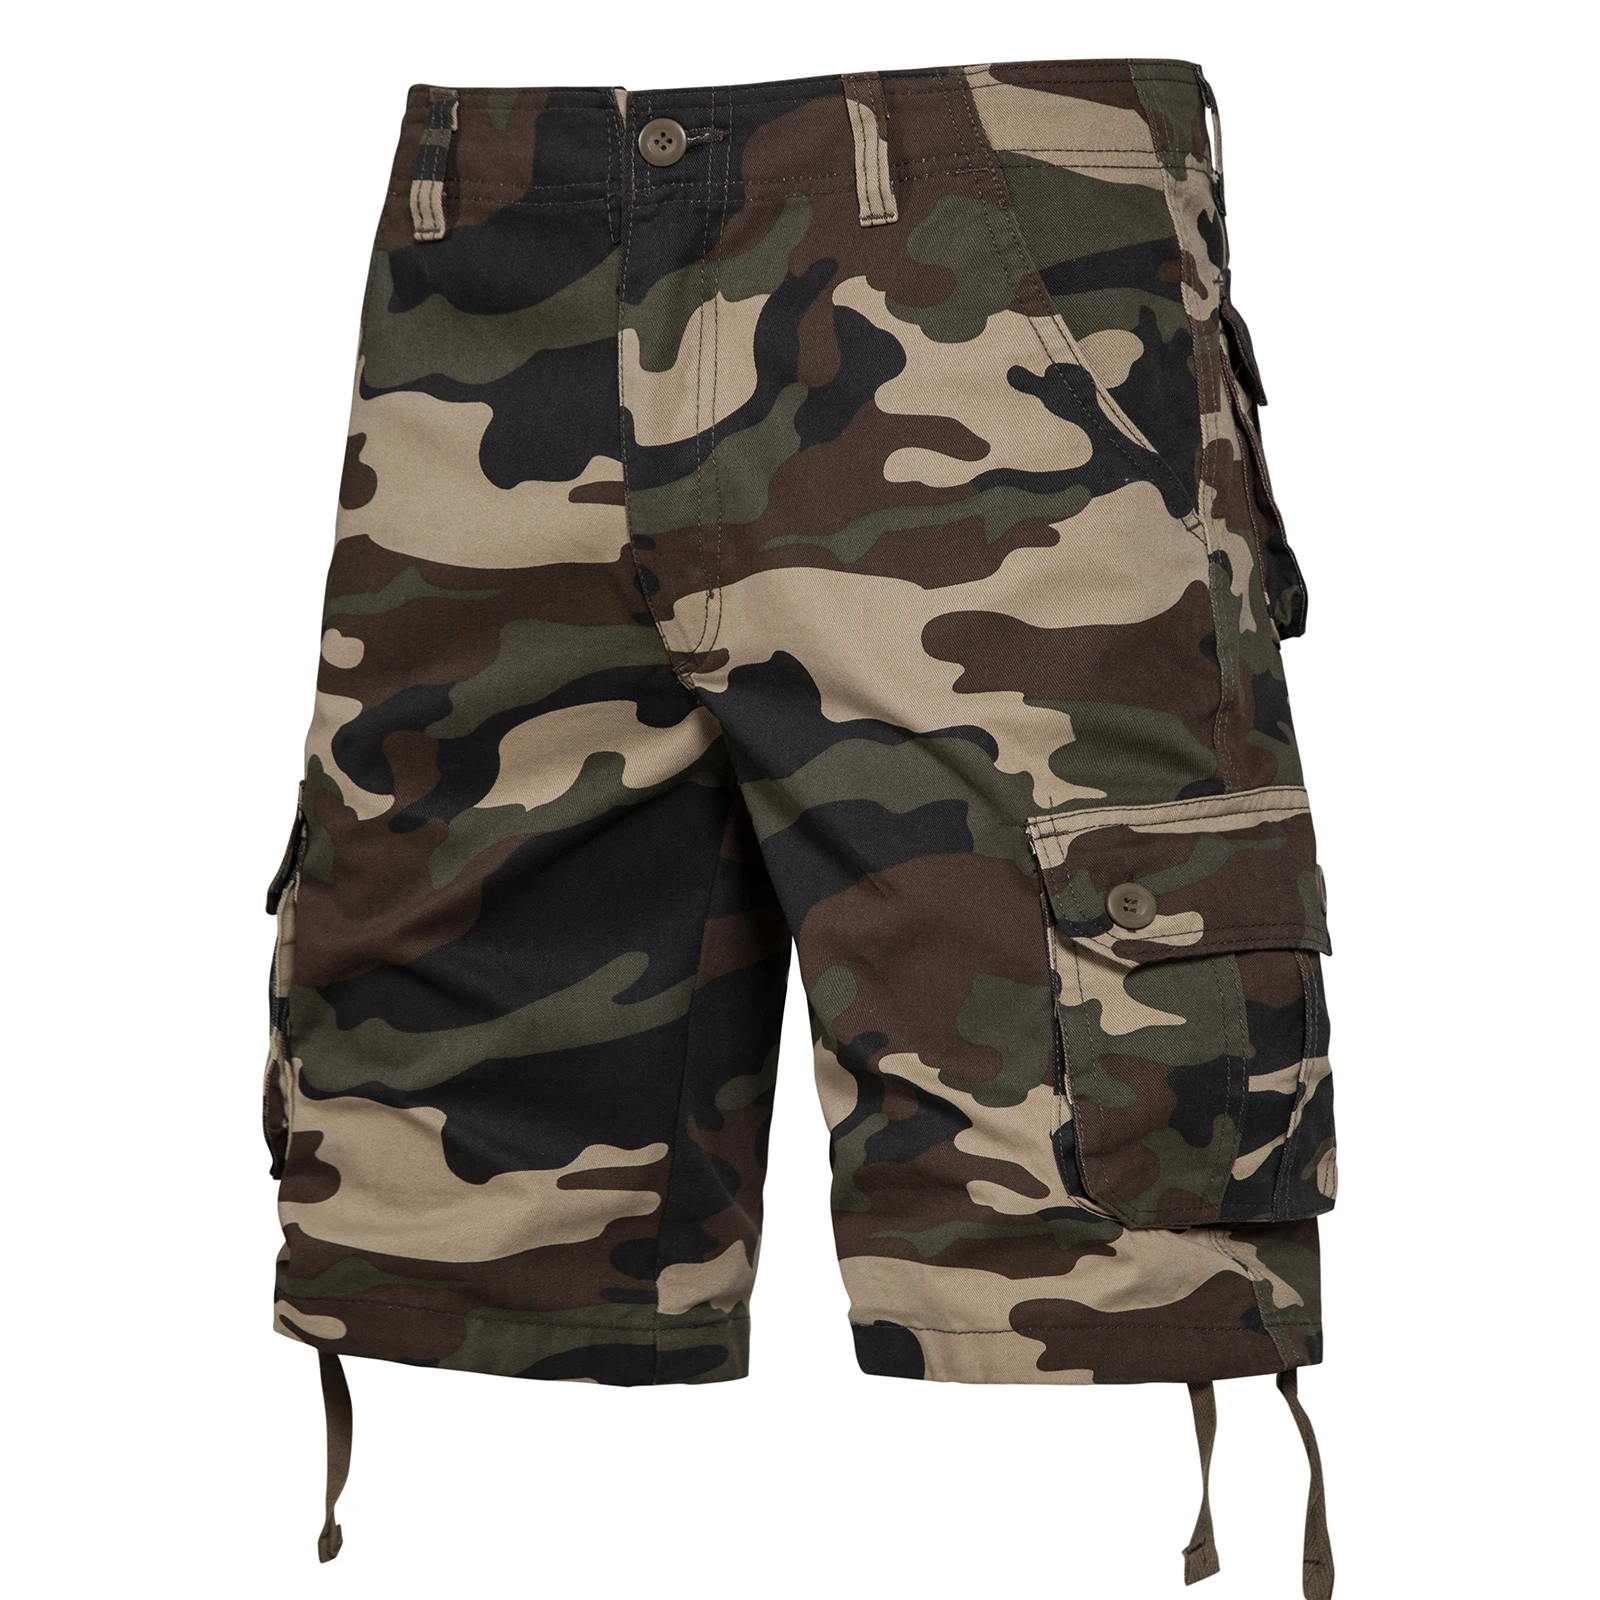 Camouflage Shorts for Men Cargo Tactical Gym Military Ripstop Work Cotton Training Hiking Outdoor White Big Size Summer Pants